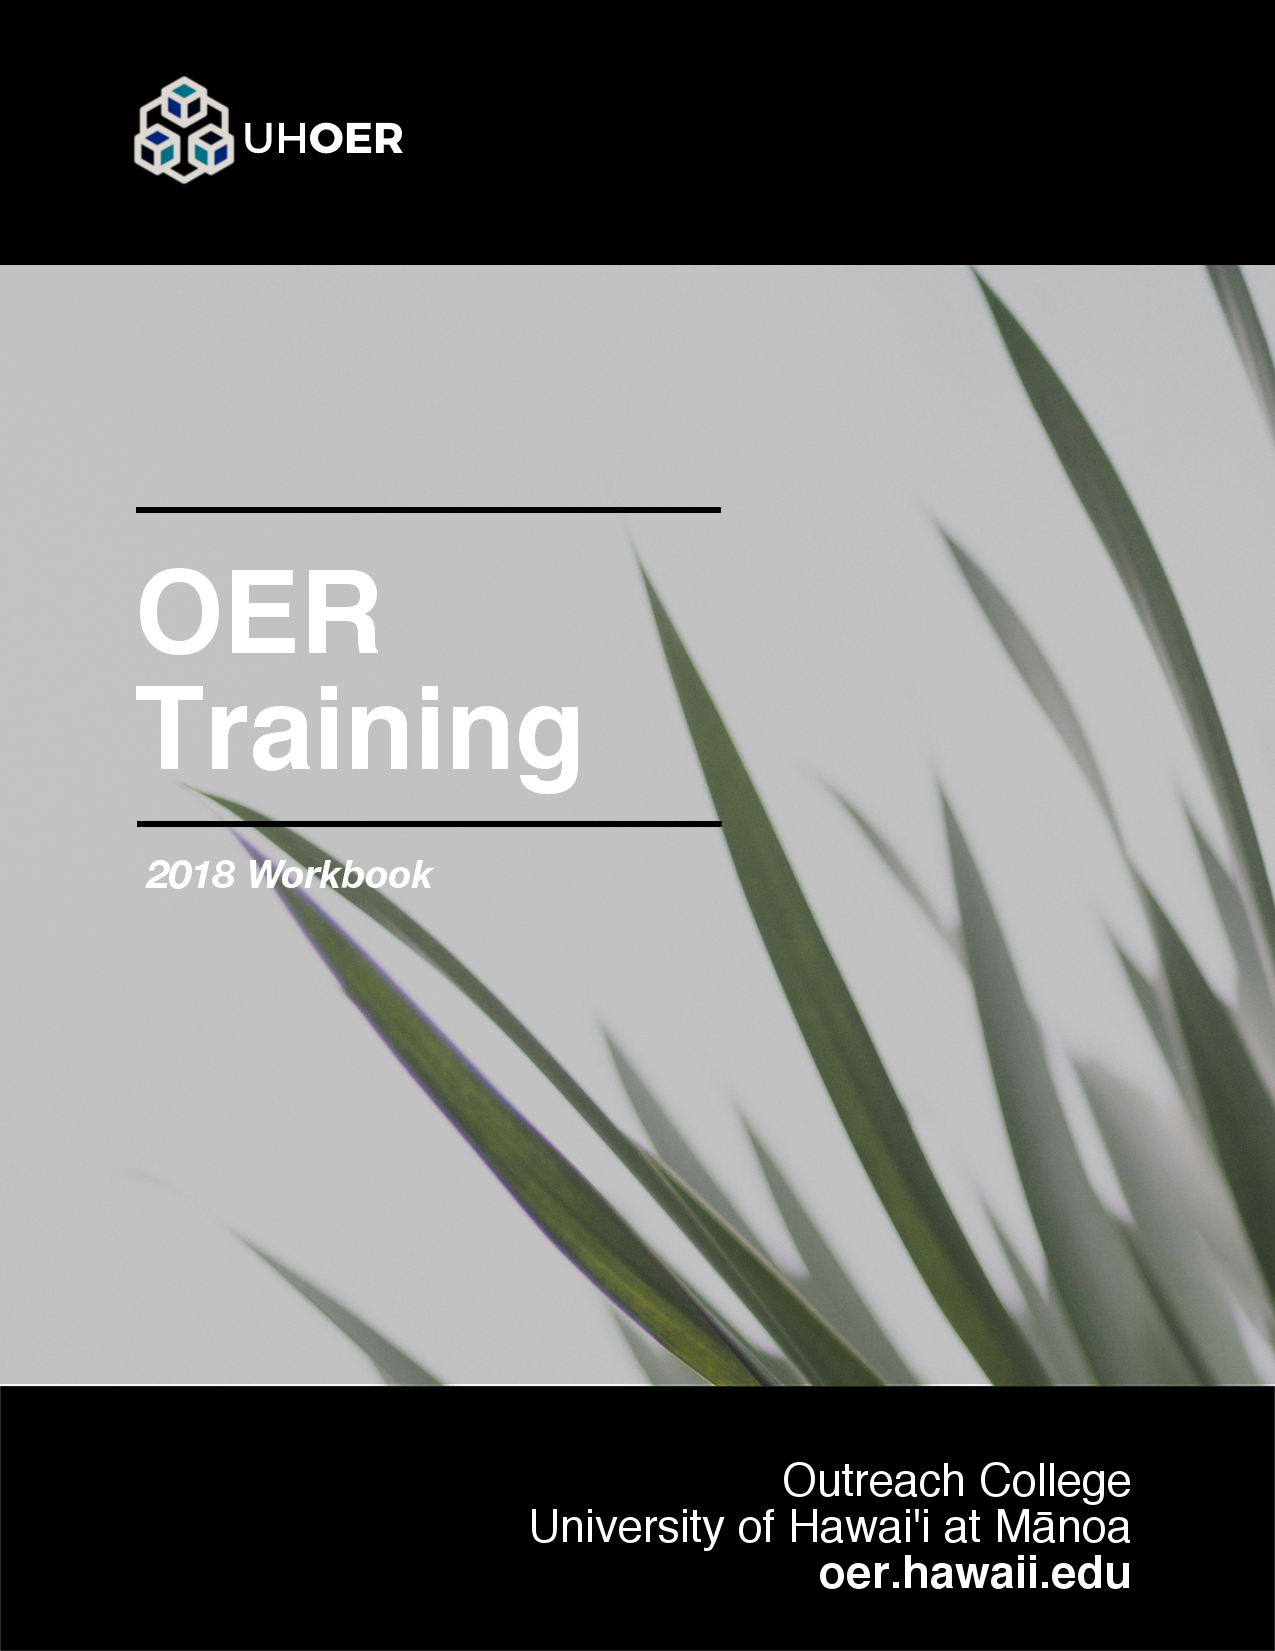 OER Training guide from the University of Hawaii